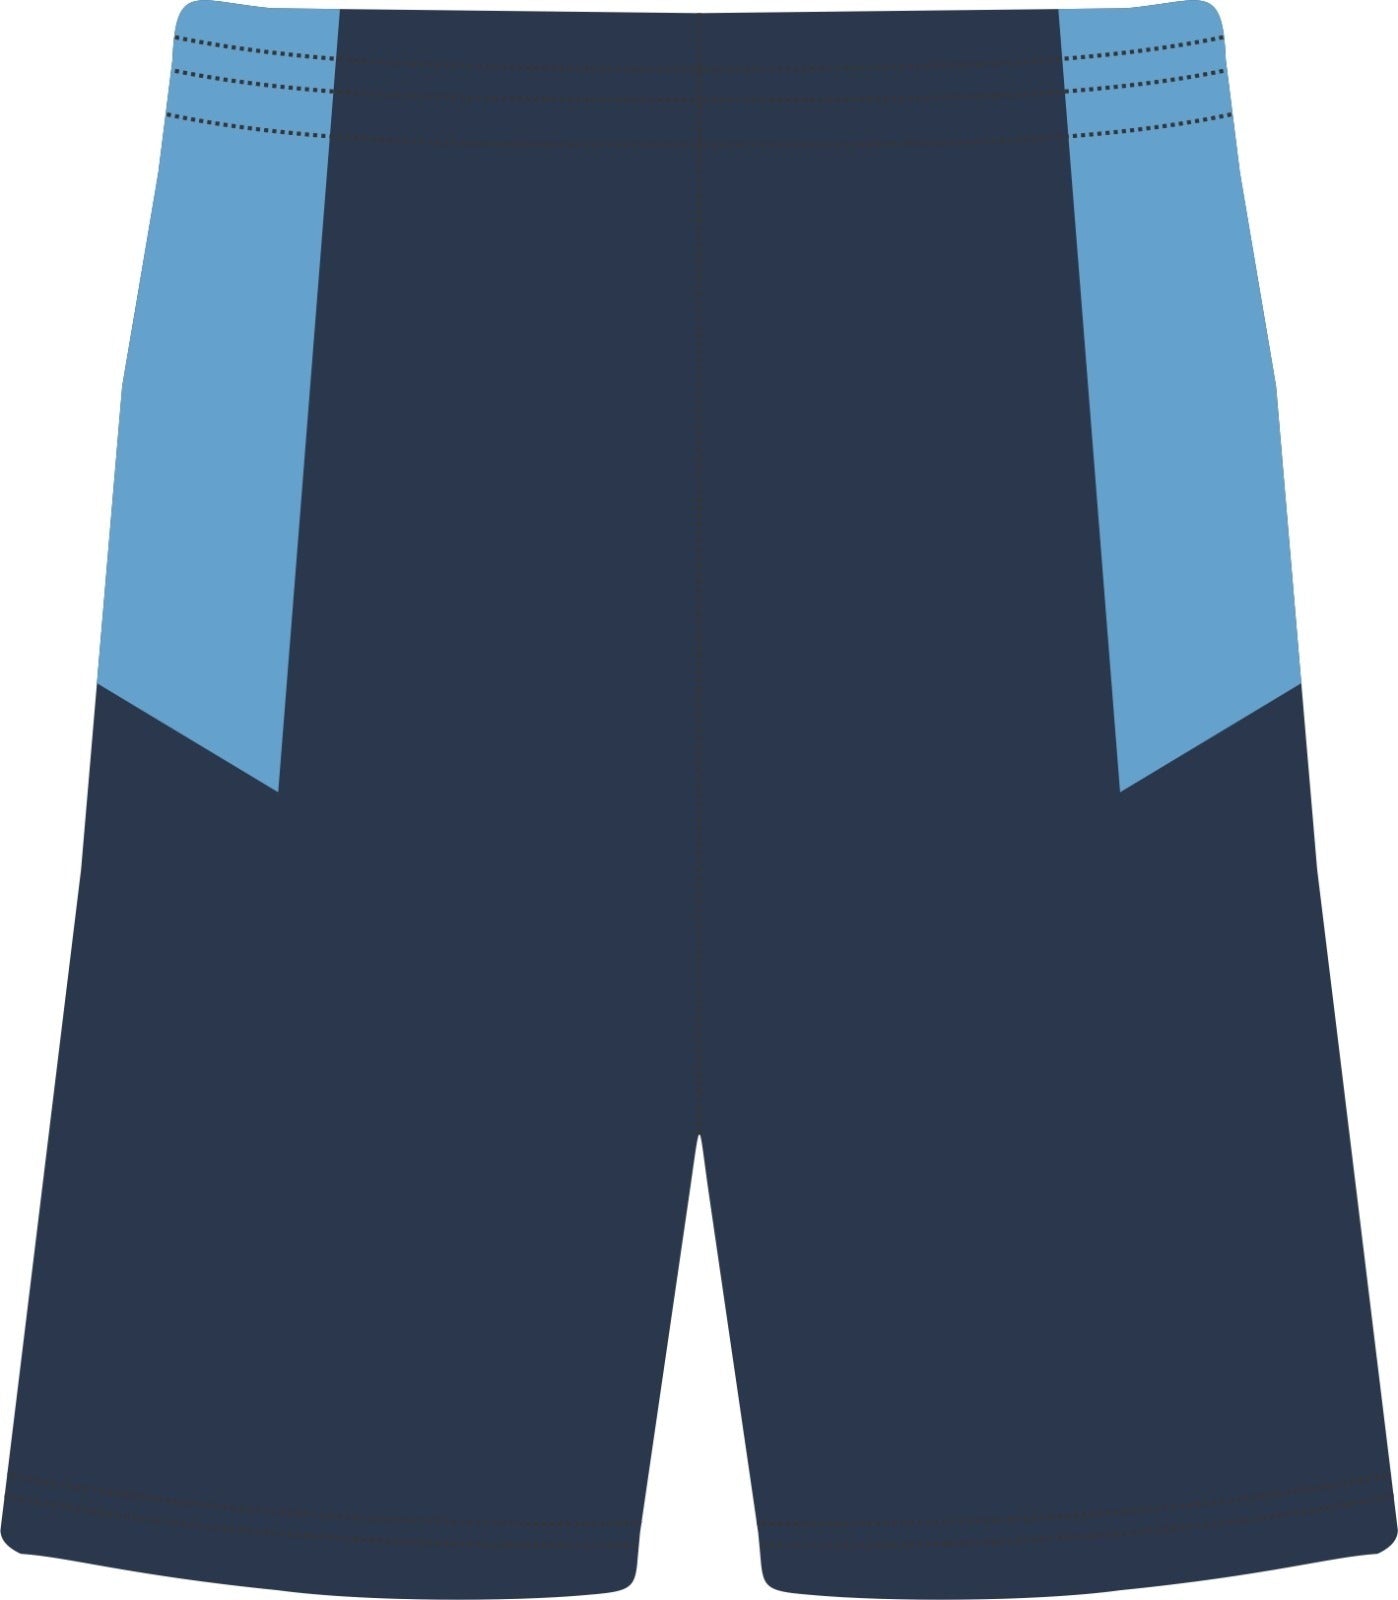 The Bromfords School | Official (new) Navy / Cyclone Blue Sports Shorts - Schoolwear Centres | School Uniforms near me